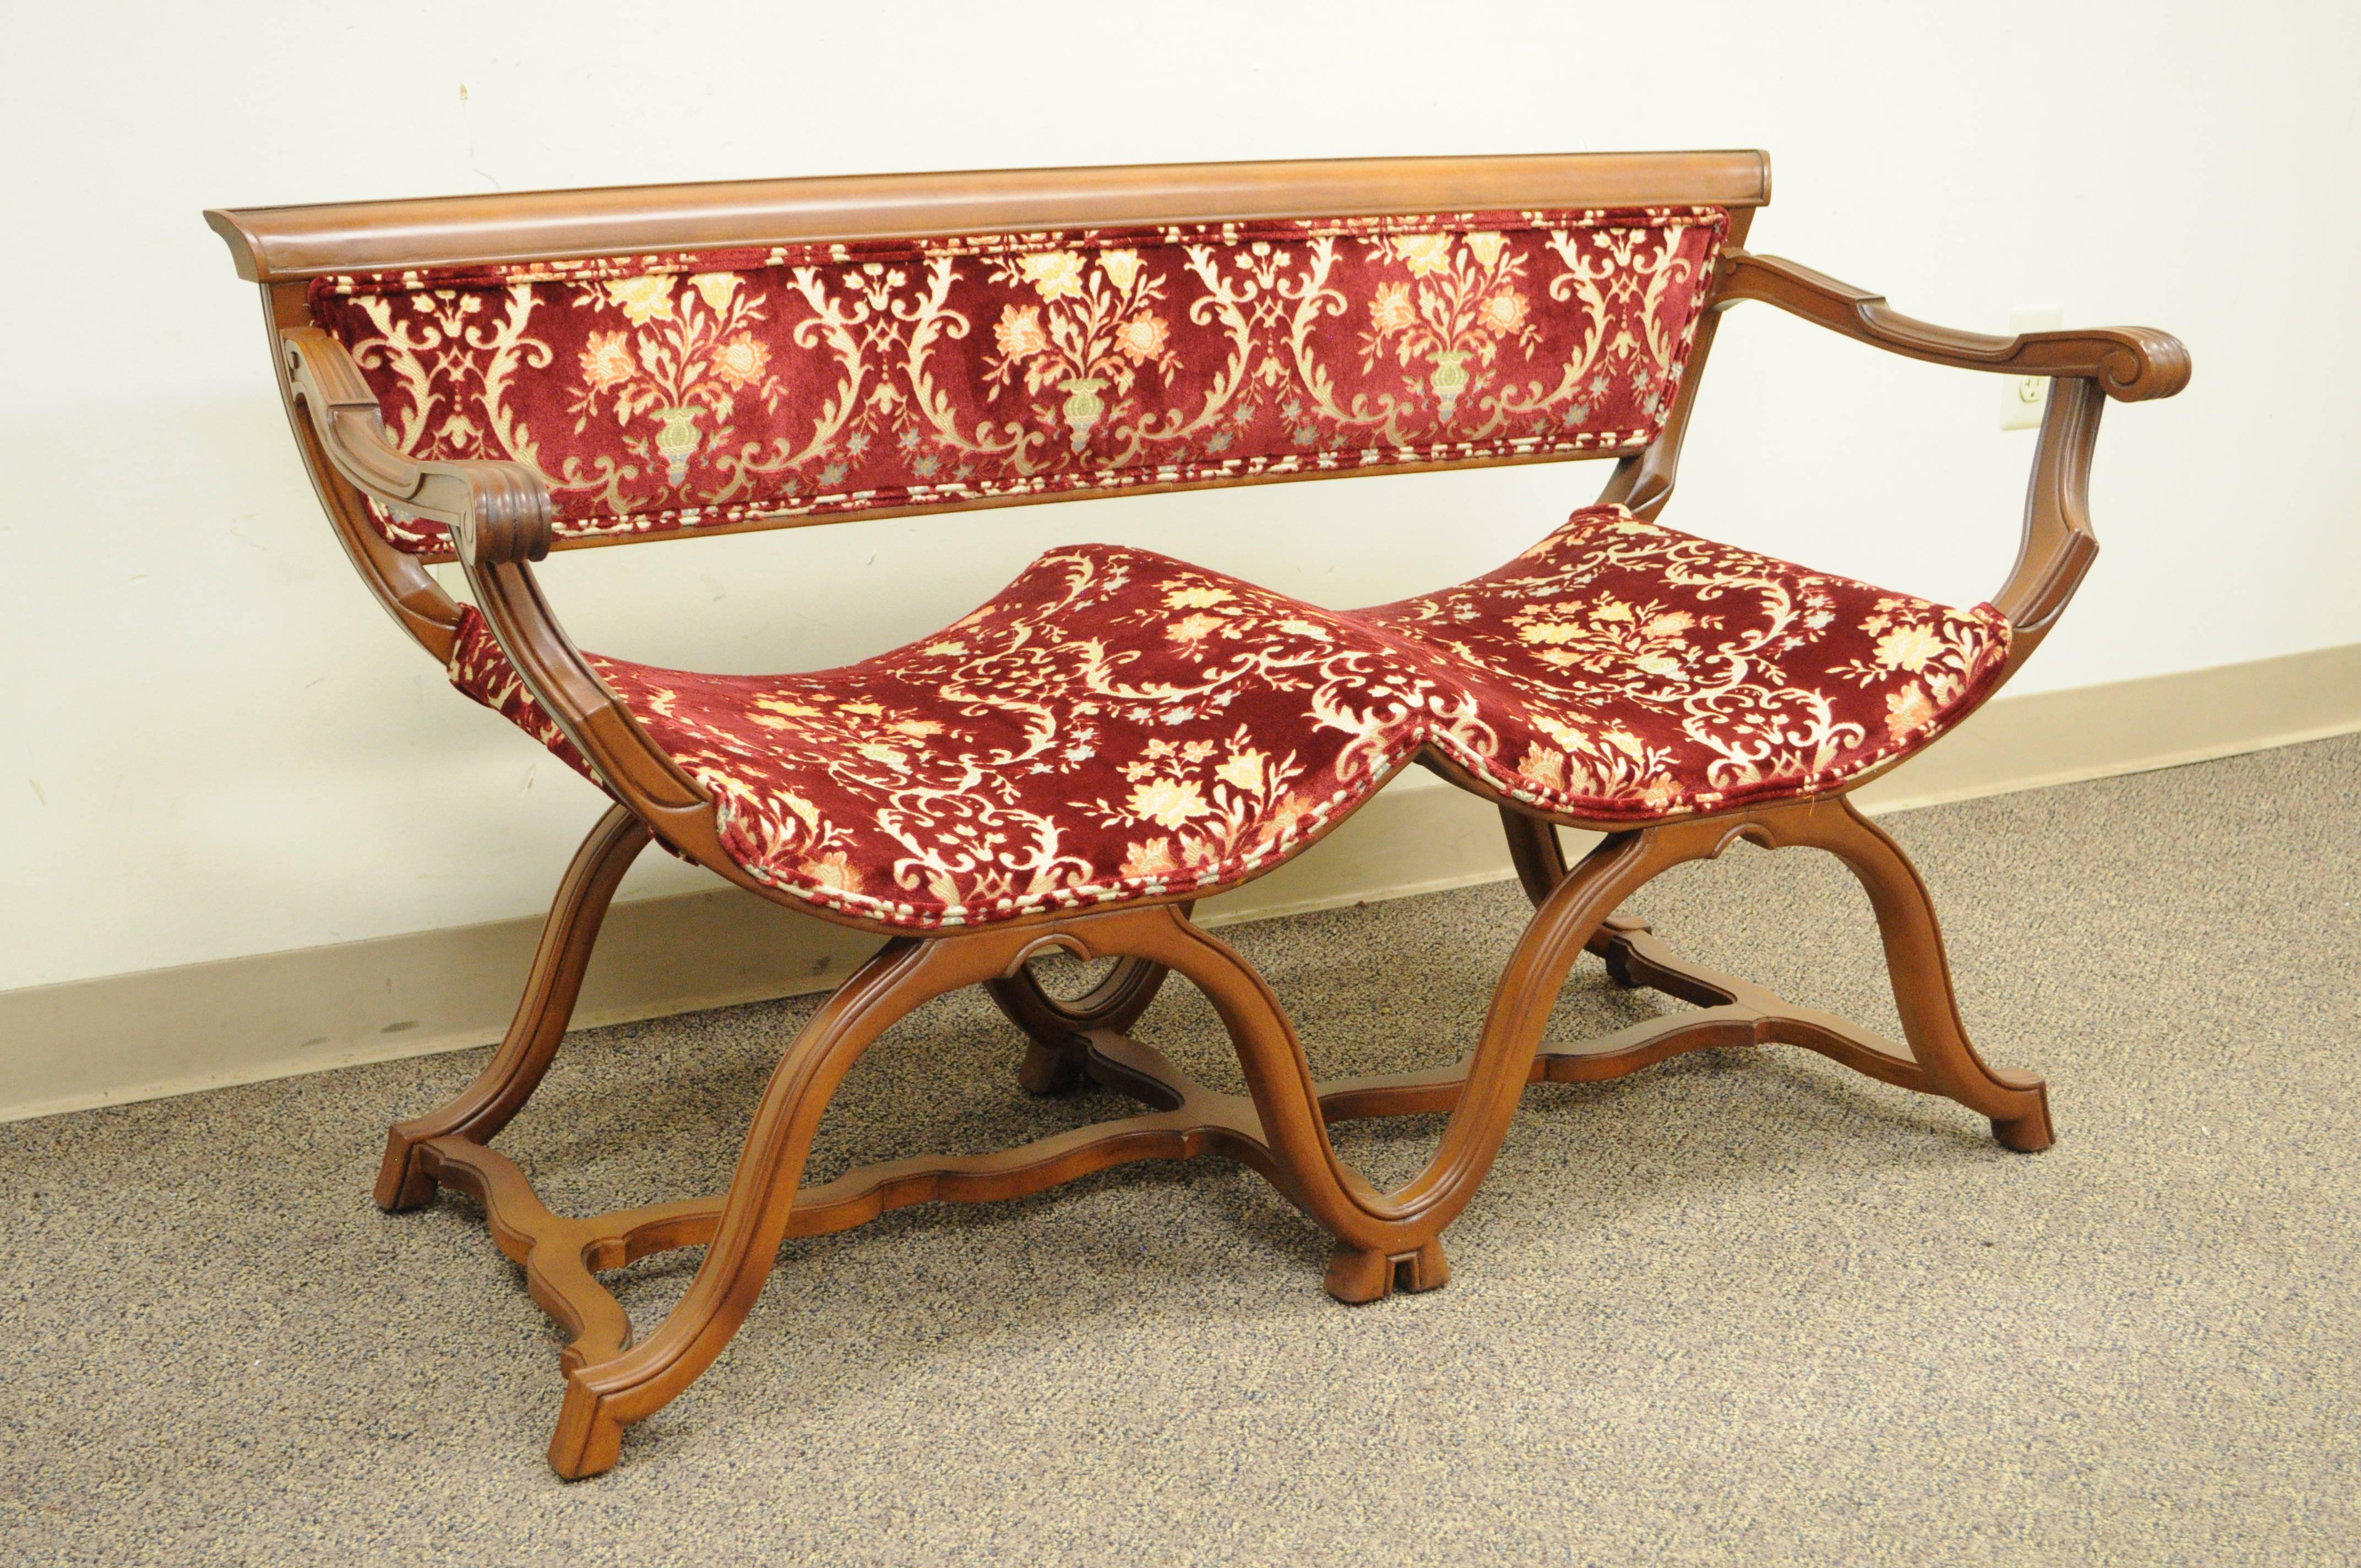 Unique vintage Hollywood Regency double Curule X-form Savonarola style bench. Item features a solid walnut carved wood frame, stretcher base, double curved seats, red textured floral printed upholstery, and great quality and construction.